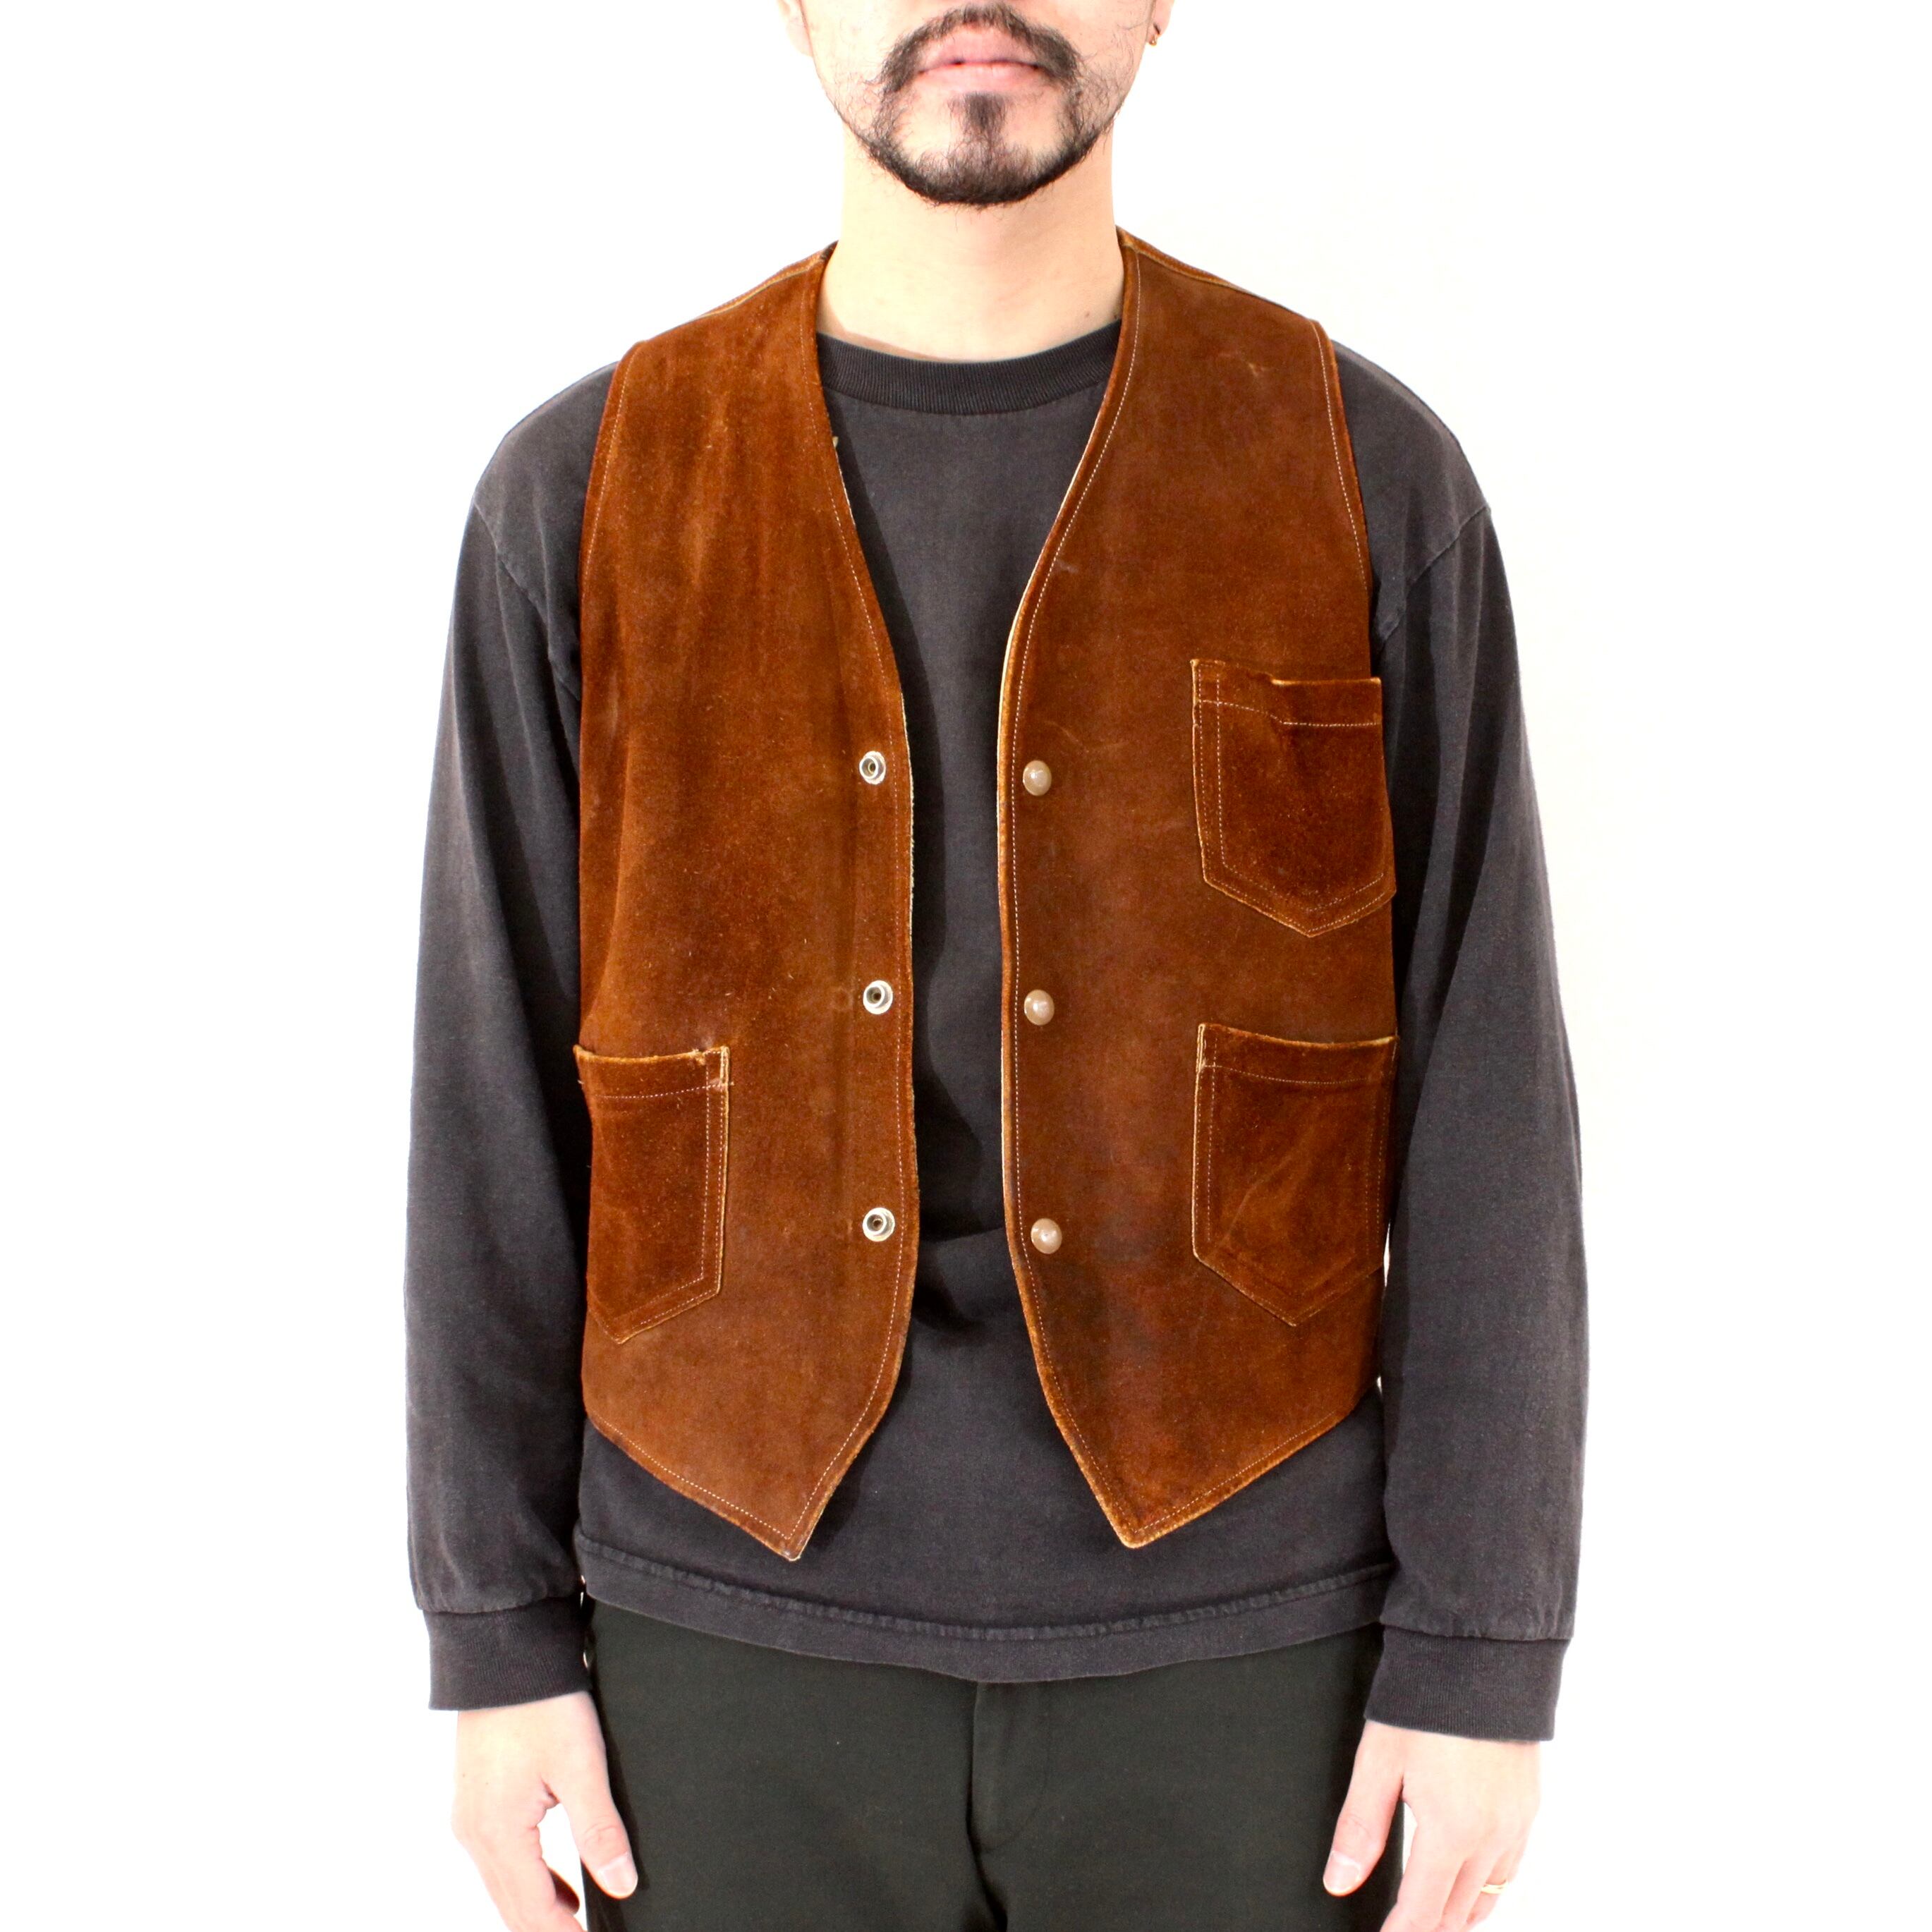 1031. 1950's Suede leather vest 50s 50年代 スウェード レザーベスト